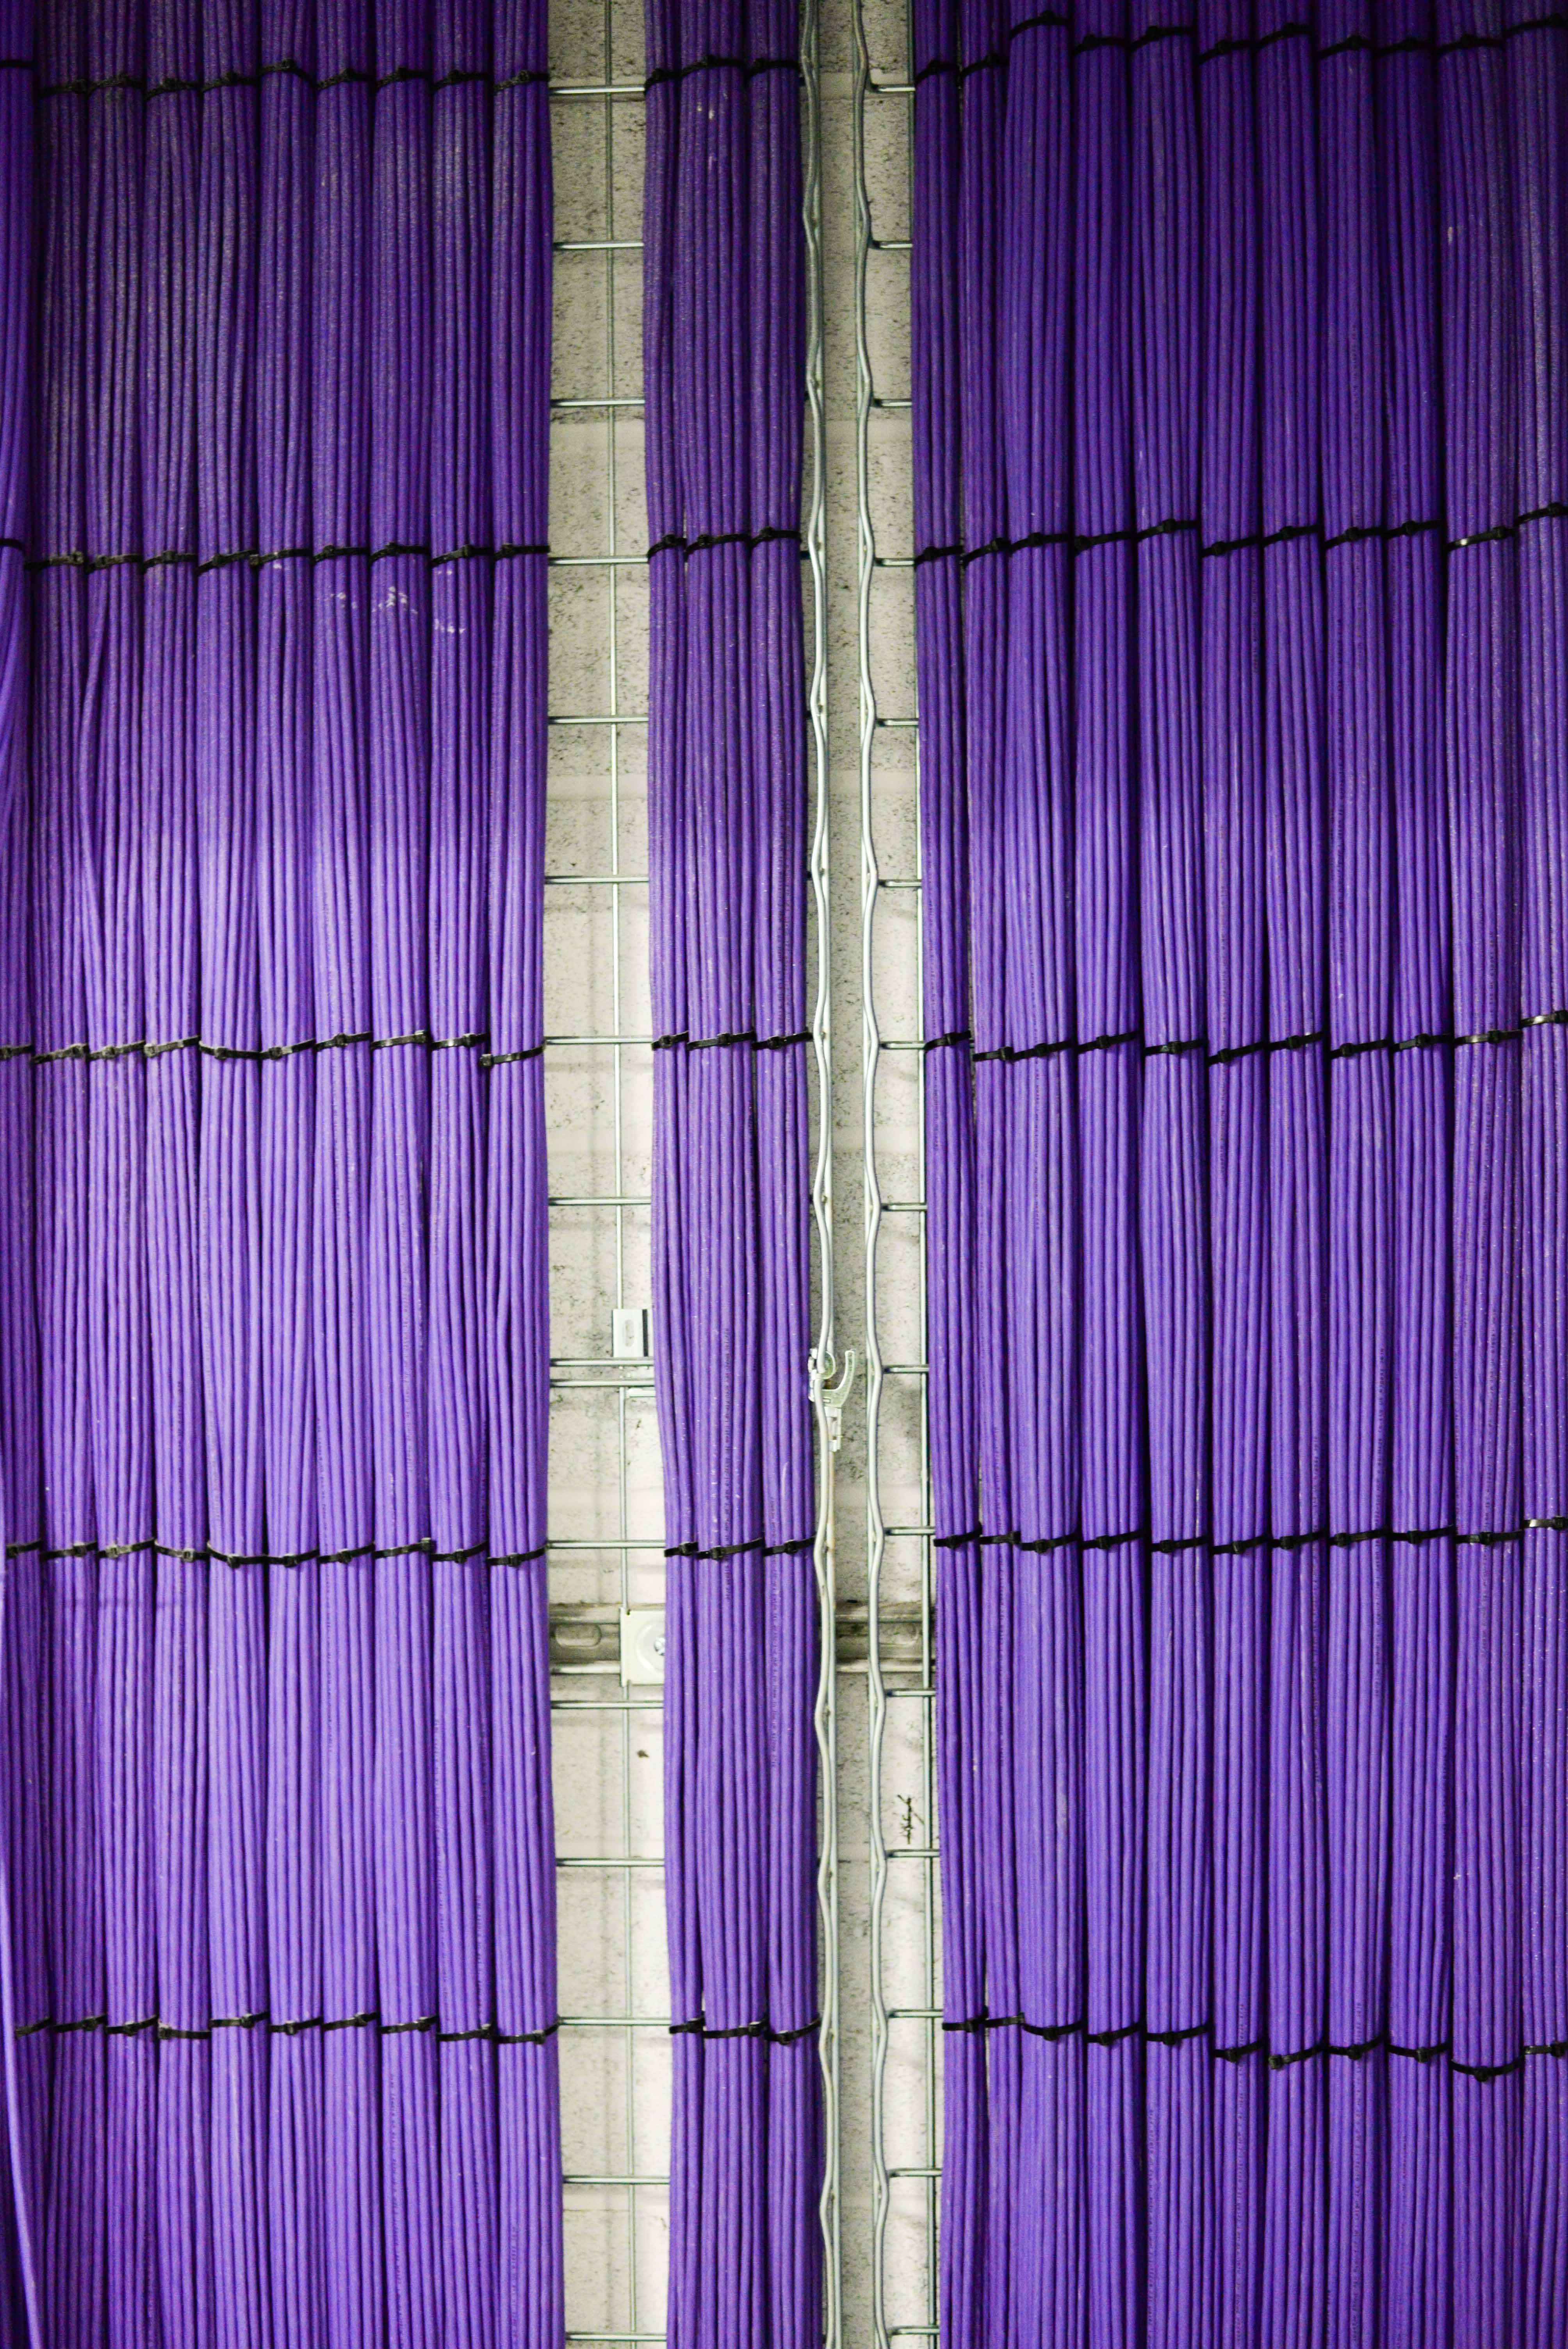 Image of purple pipes on a wall